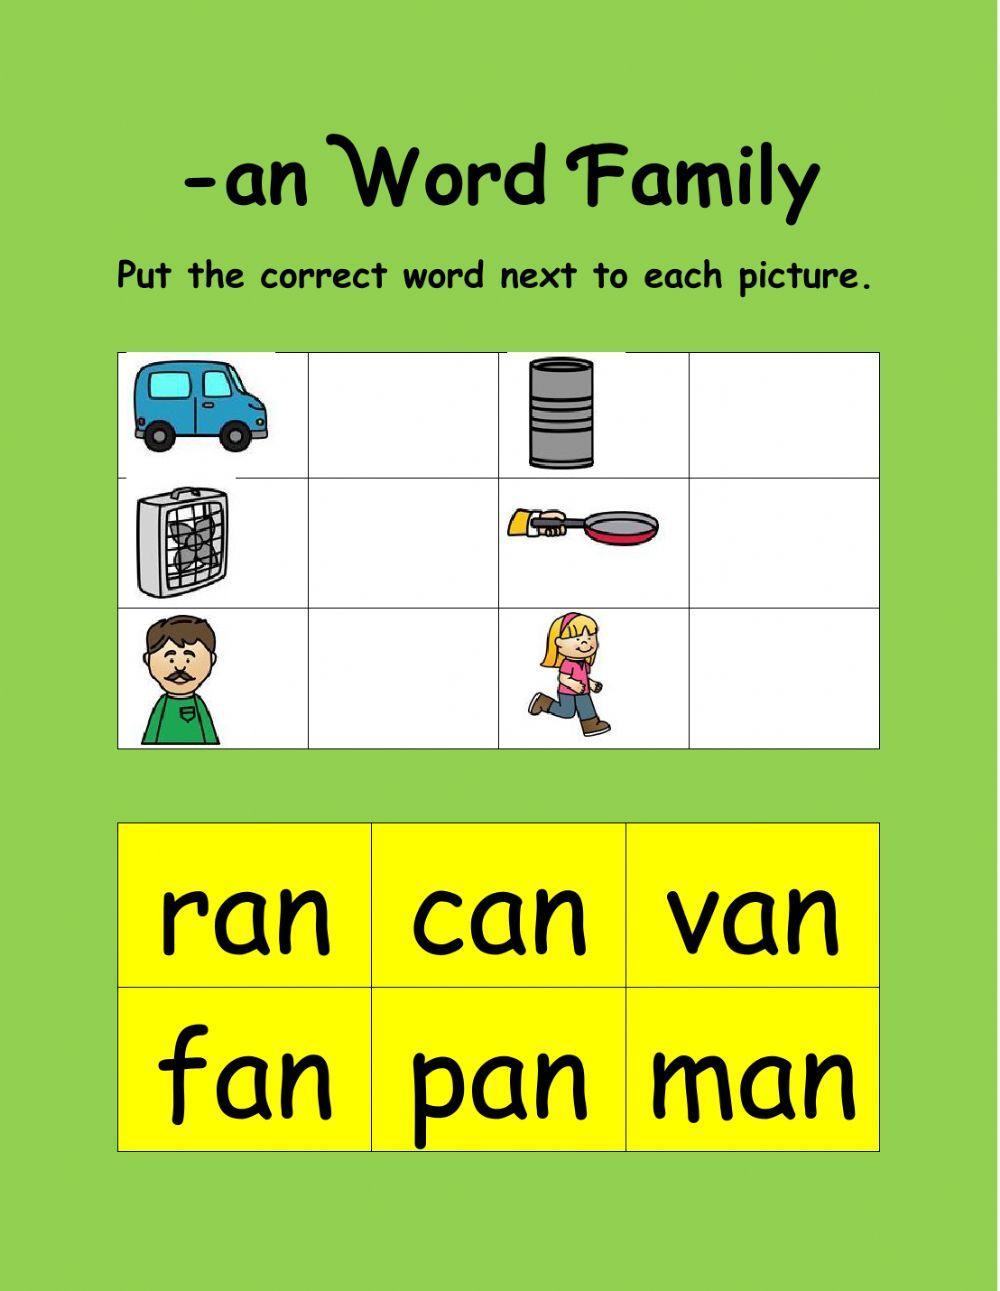 An word family